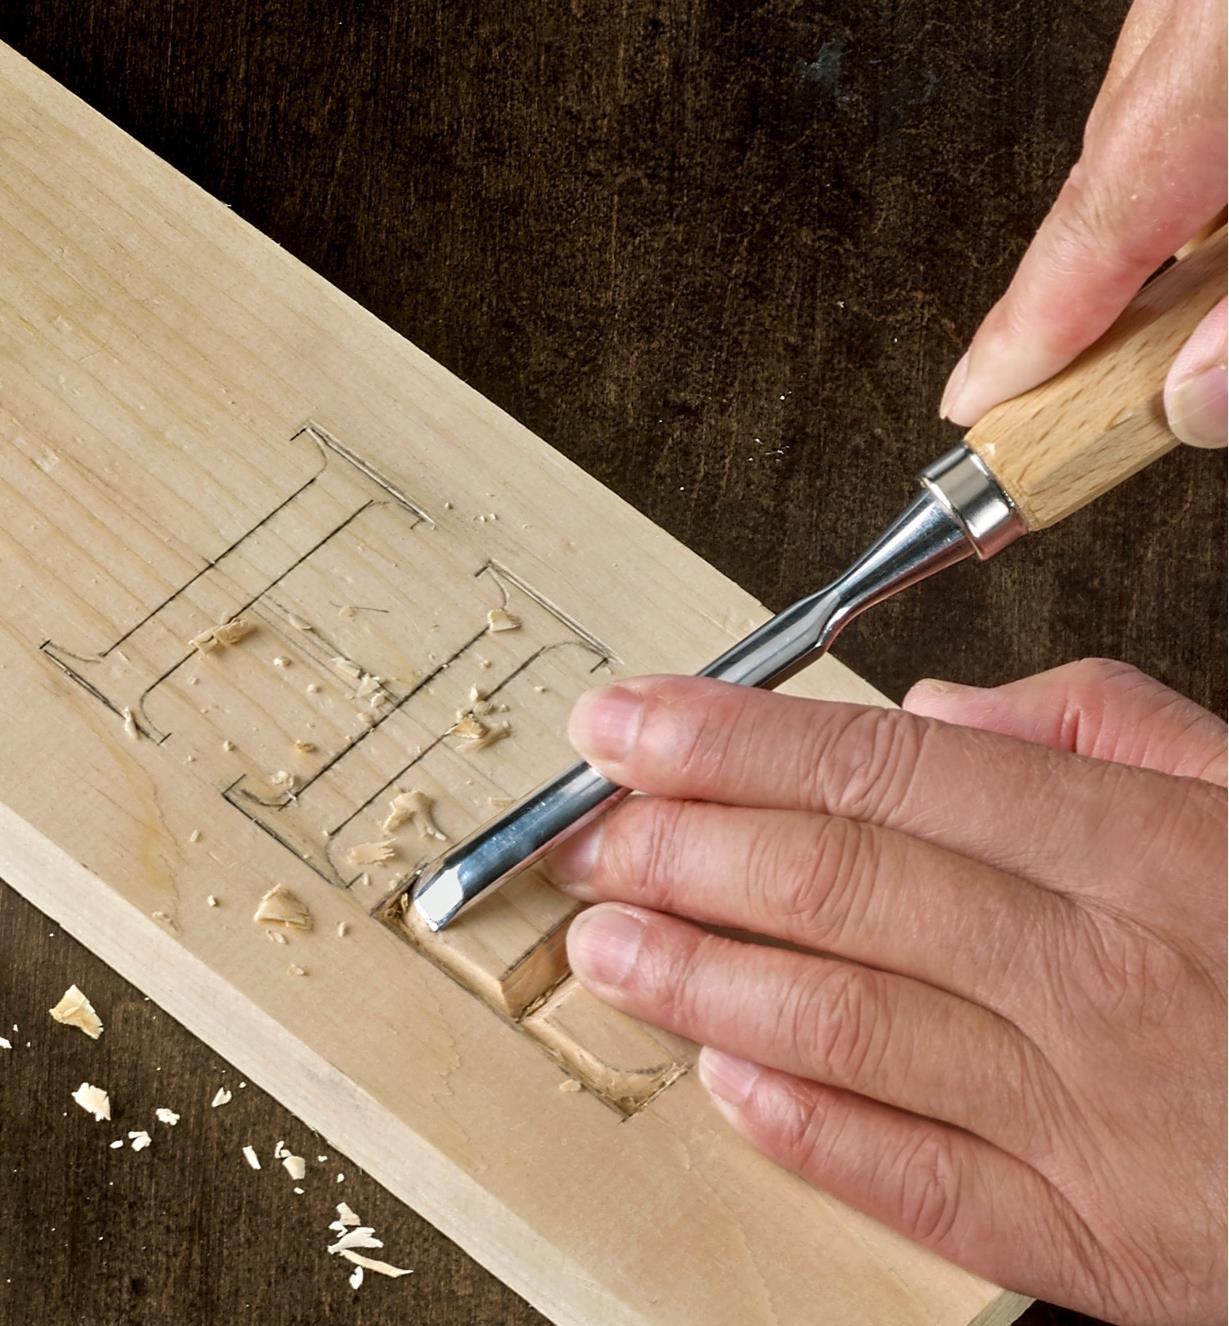 Using a gouge from the seven-piece carving-tool set to incise lettering for a sign-making project